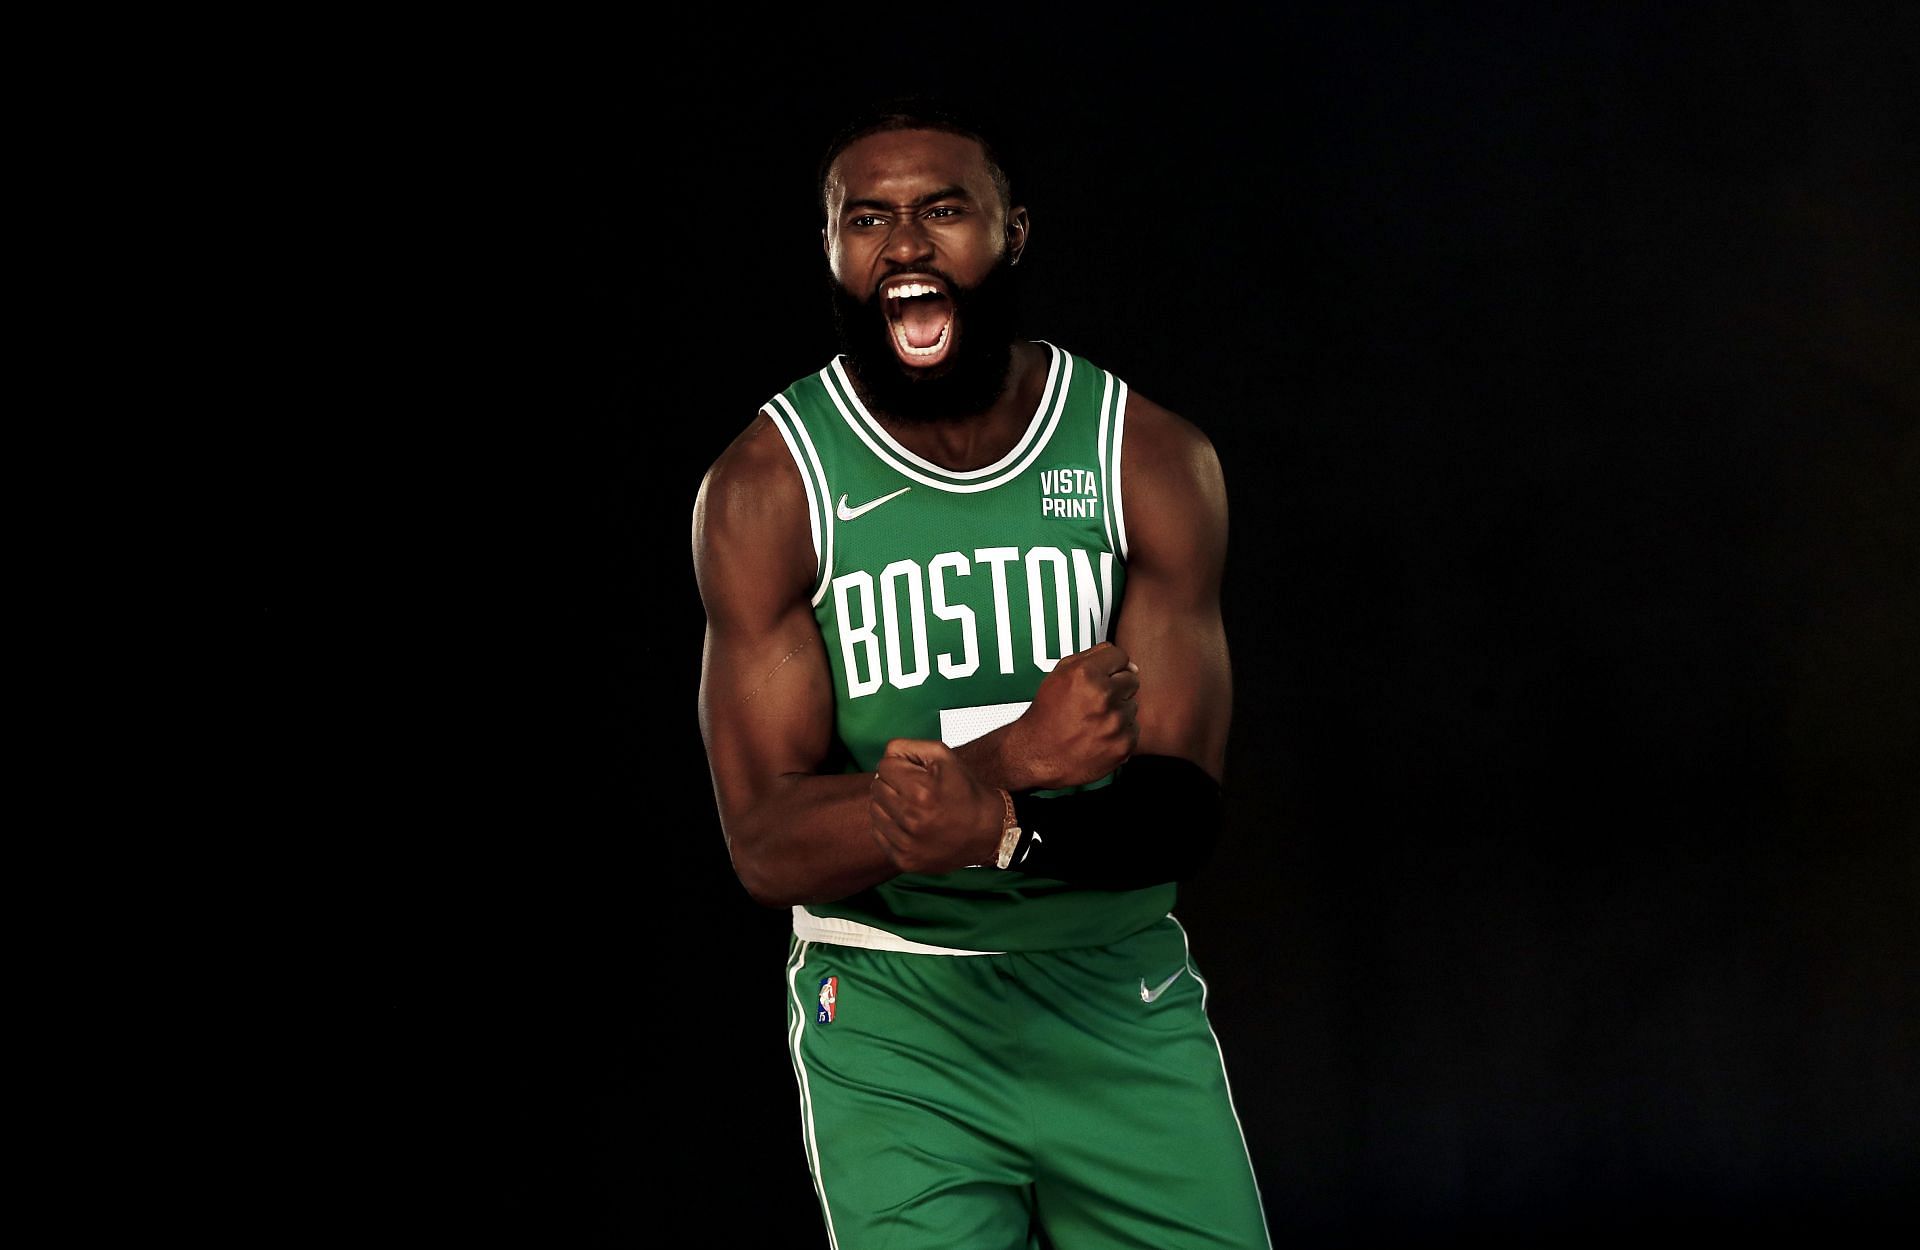 Jaylen Brown #7 of the Boston Celtics poses for a photo during Media Day at High Output Studios on September 27, 2021 in Canton, Massachusetts.